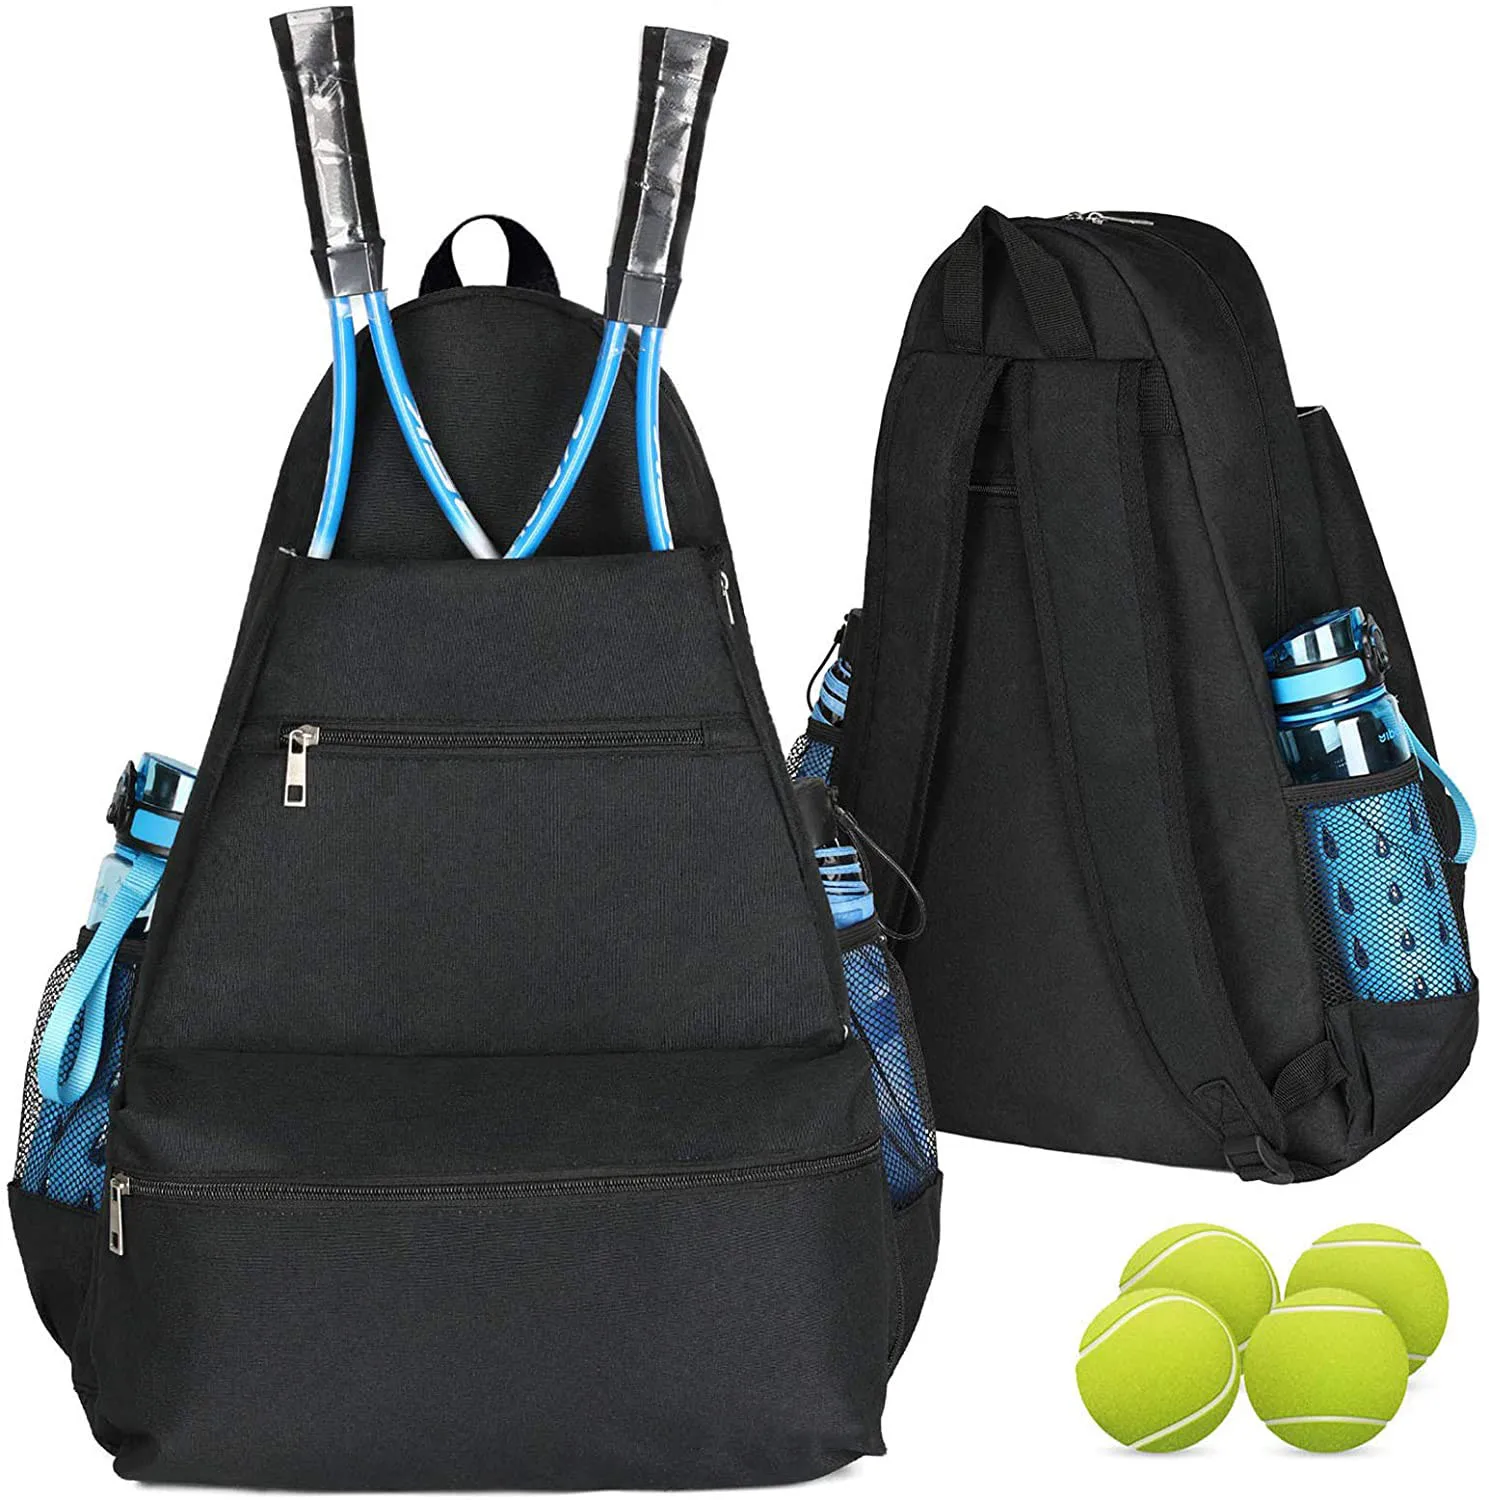 

Tennis Backpack Large Tennis Bags for Women and Men to Hold Tennis Racket Pickleball Paddles Badminton Squash Racquet Backpack